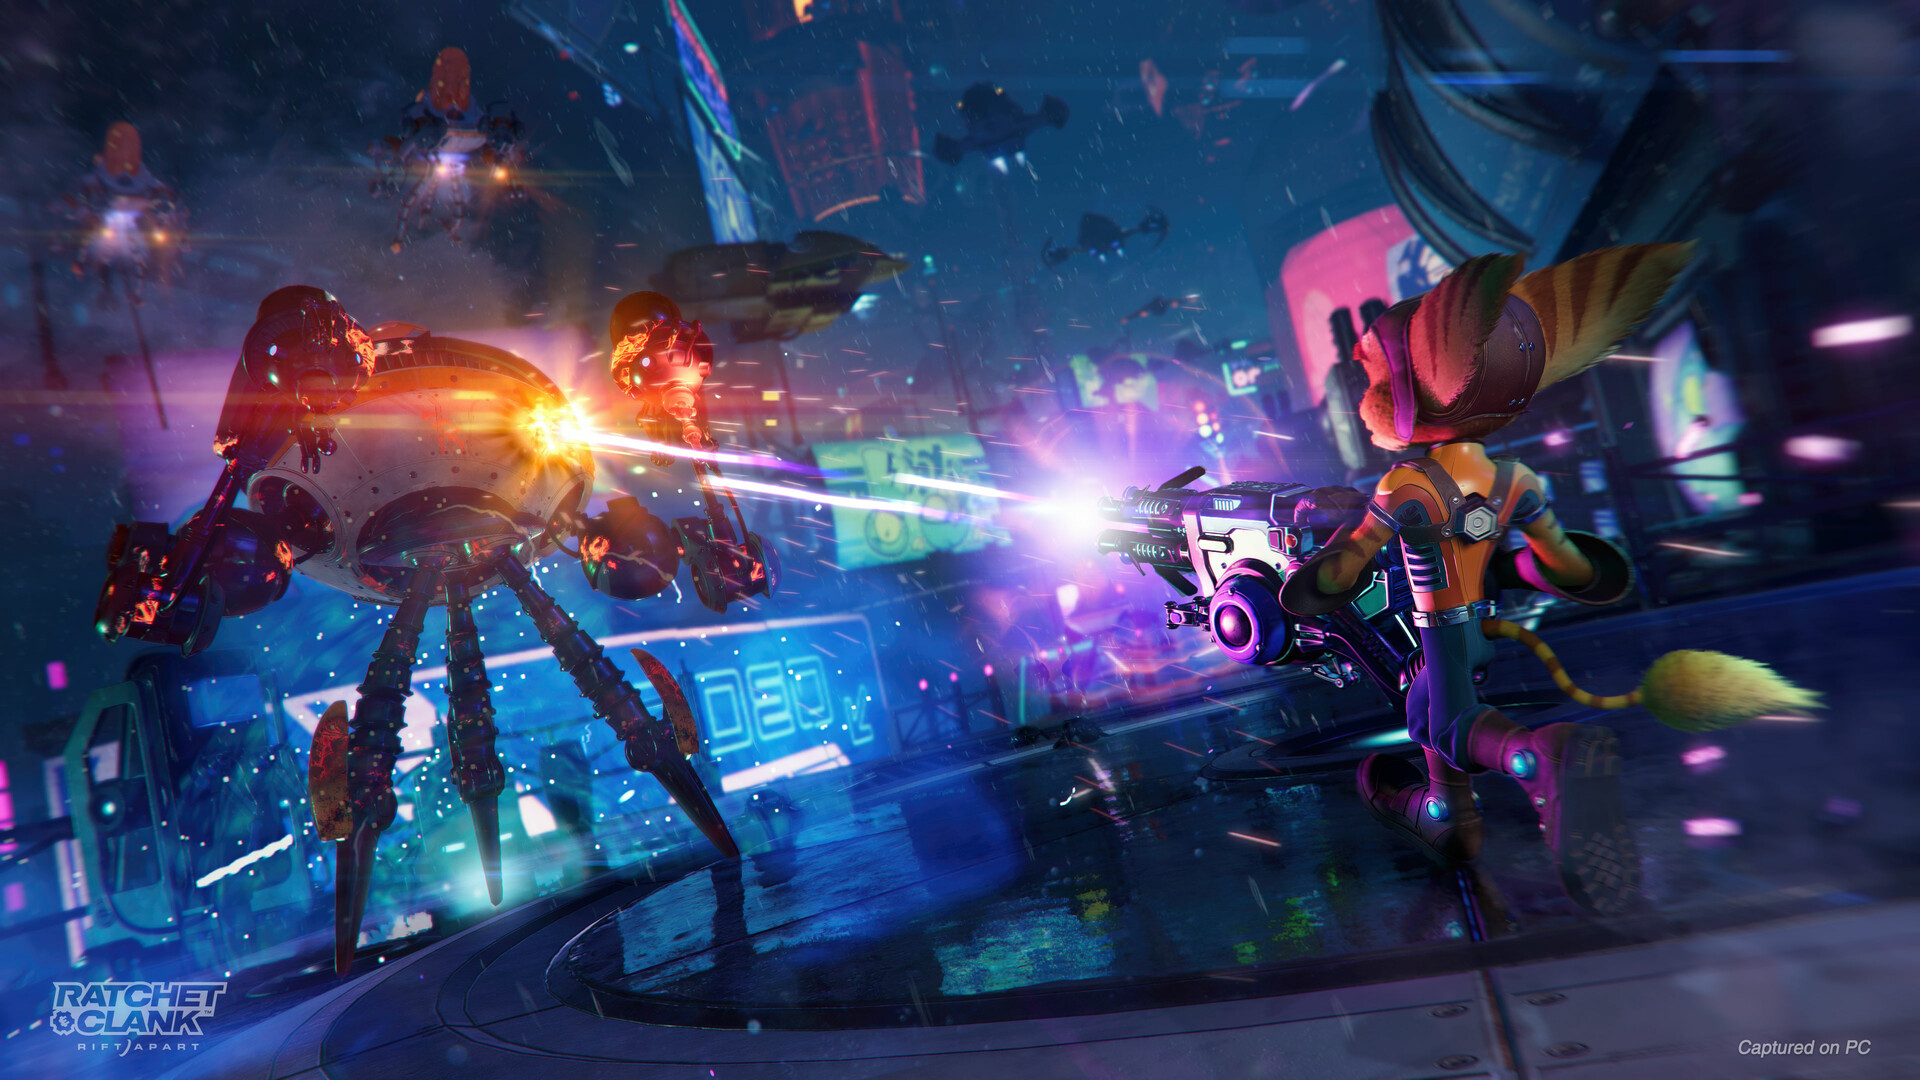 Ratchet & Clank: Rift Apart Is Coming to PC on July 26th; To Support NVIDIA  DLSS 3, Reflex, DLAA, and More